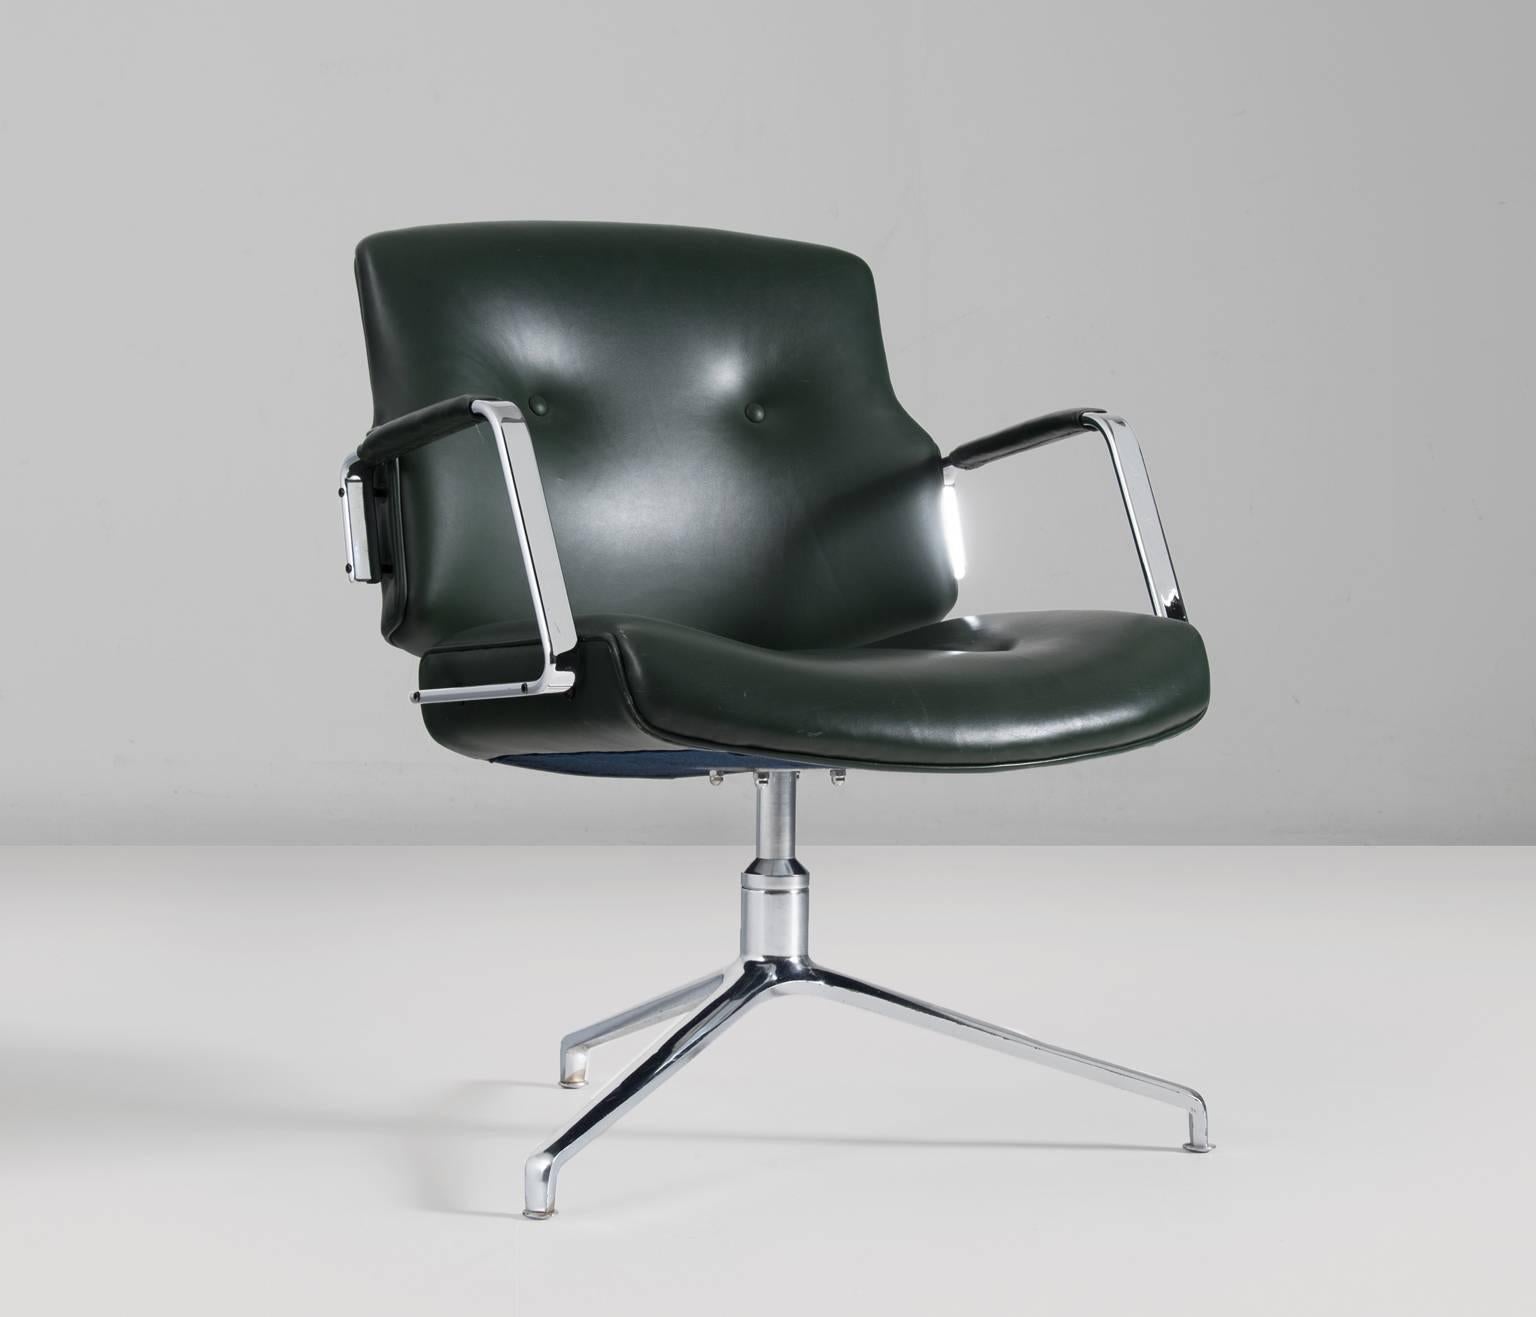 Very exclusive and rare conference or office chair (model FK-84) designed by Preben Fabricius & Jorgen Kastholm, Denmark 1970s. Manufactured by Kill International. 

This armchair is in a very good condition, both the base and the high quality